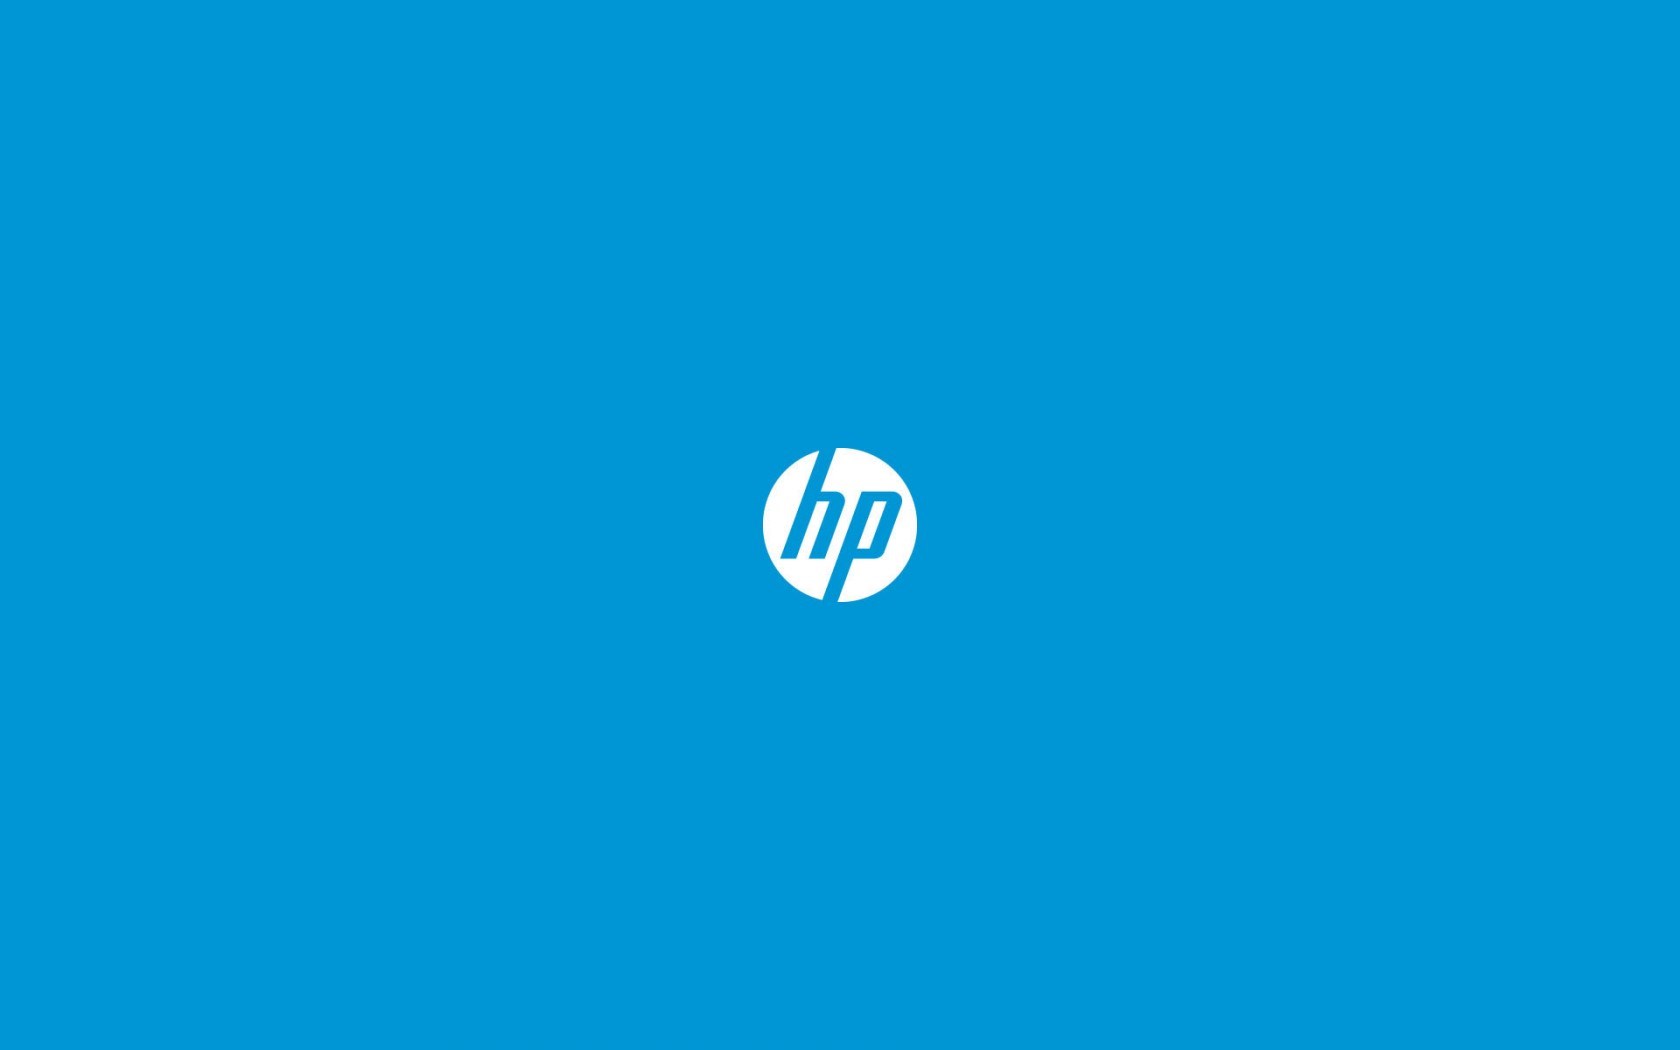 Hewlett-Packard Backgrounds, Compatible - PC, Mobile, Gadgets| 1680x1050 px